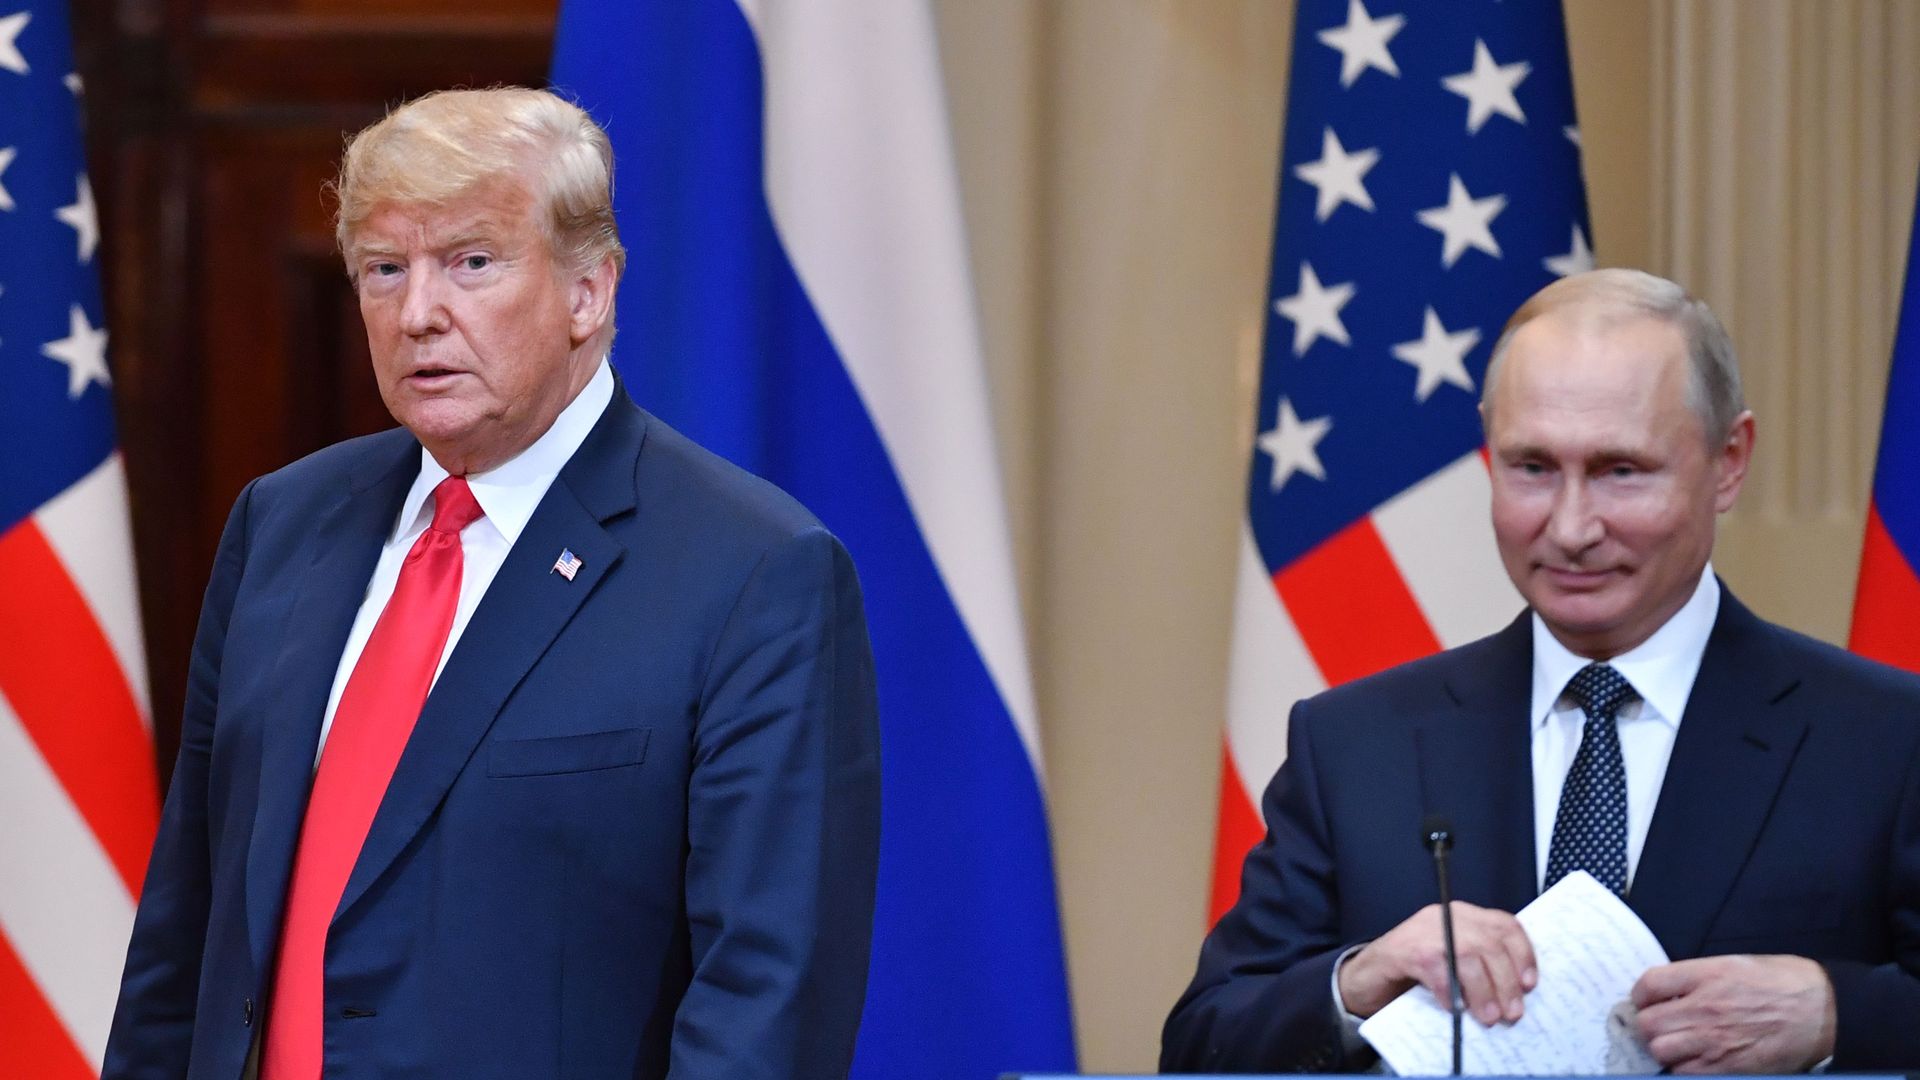 US President Donald Trump (L) and Russia's President Vladimir Putin arrive to attend a joint press conference after a meeting at the Presidential Palace in Helsinki, on July 16, 2018. 